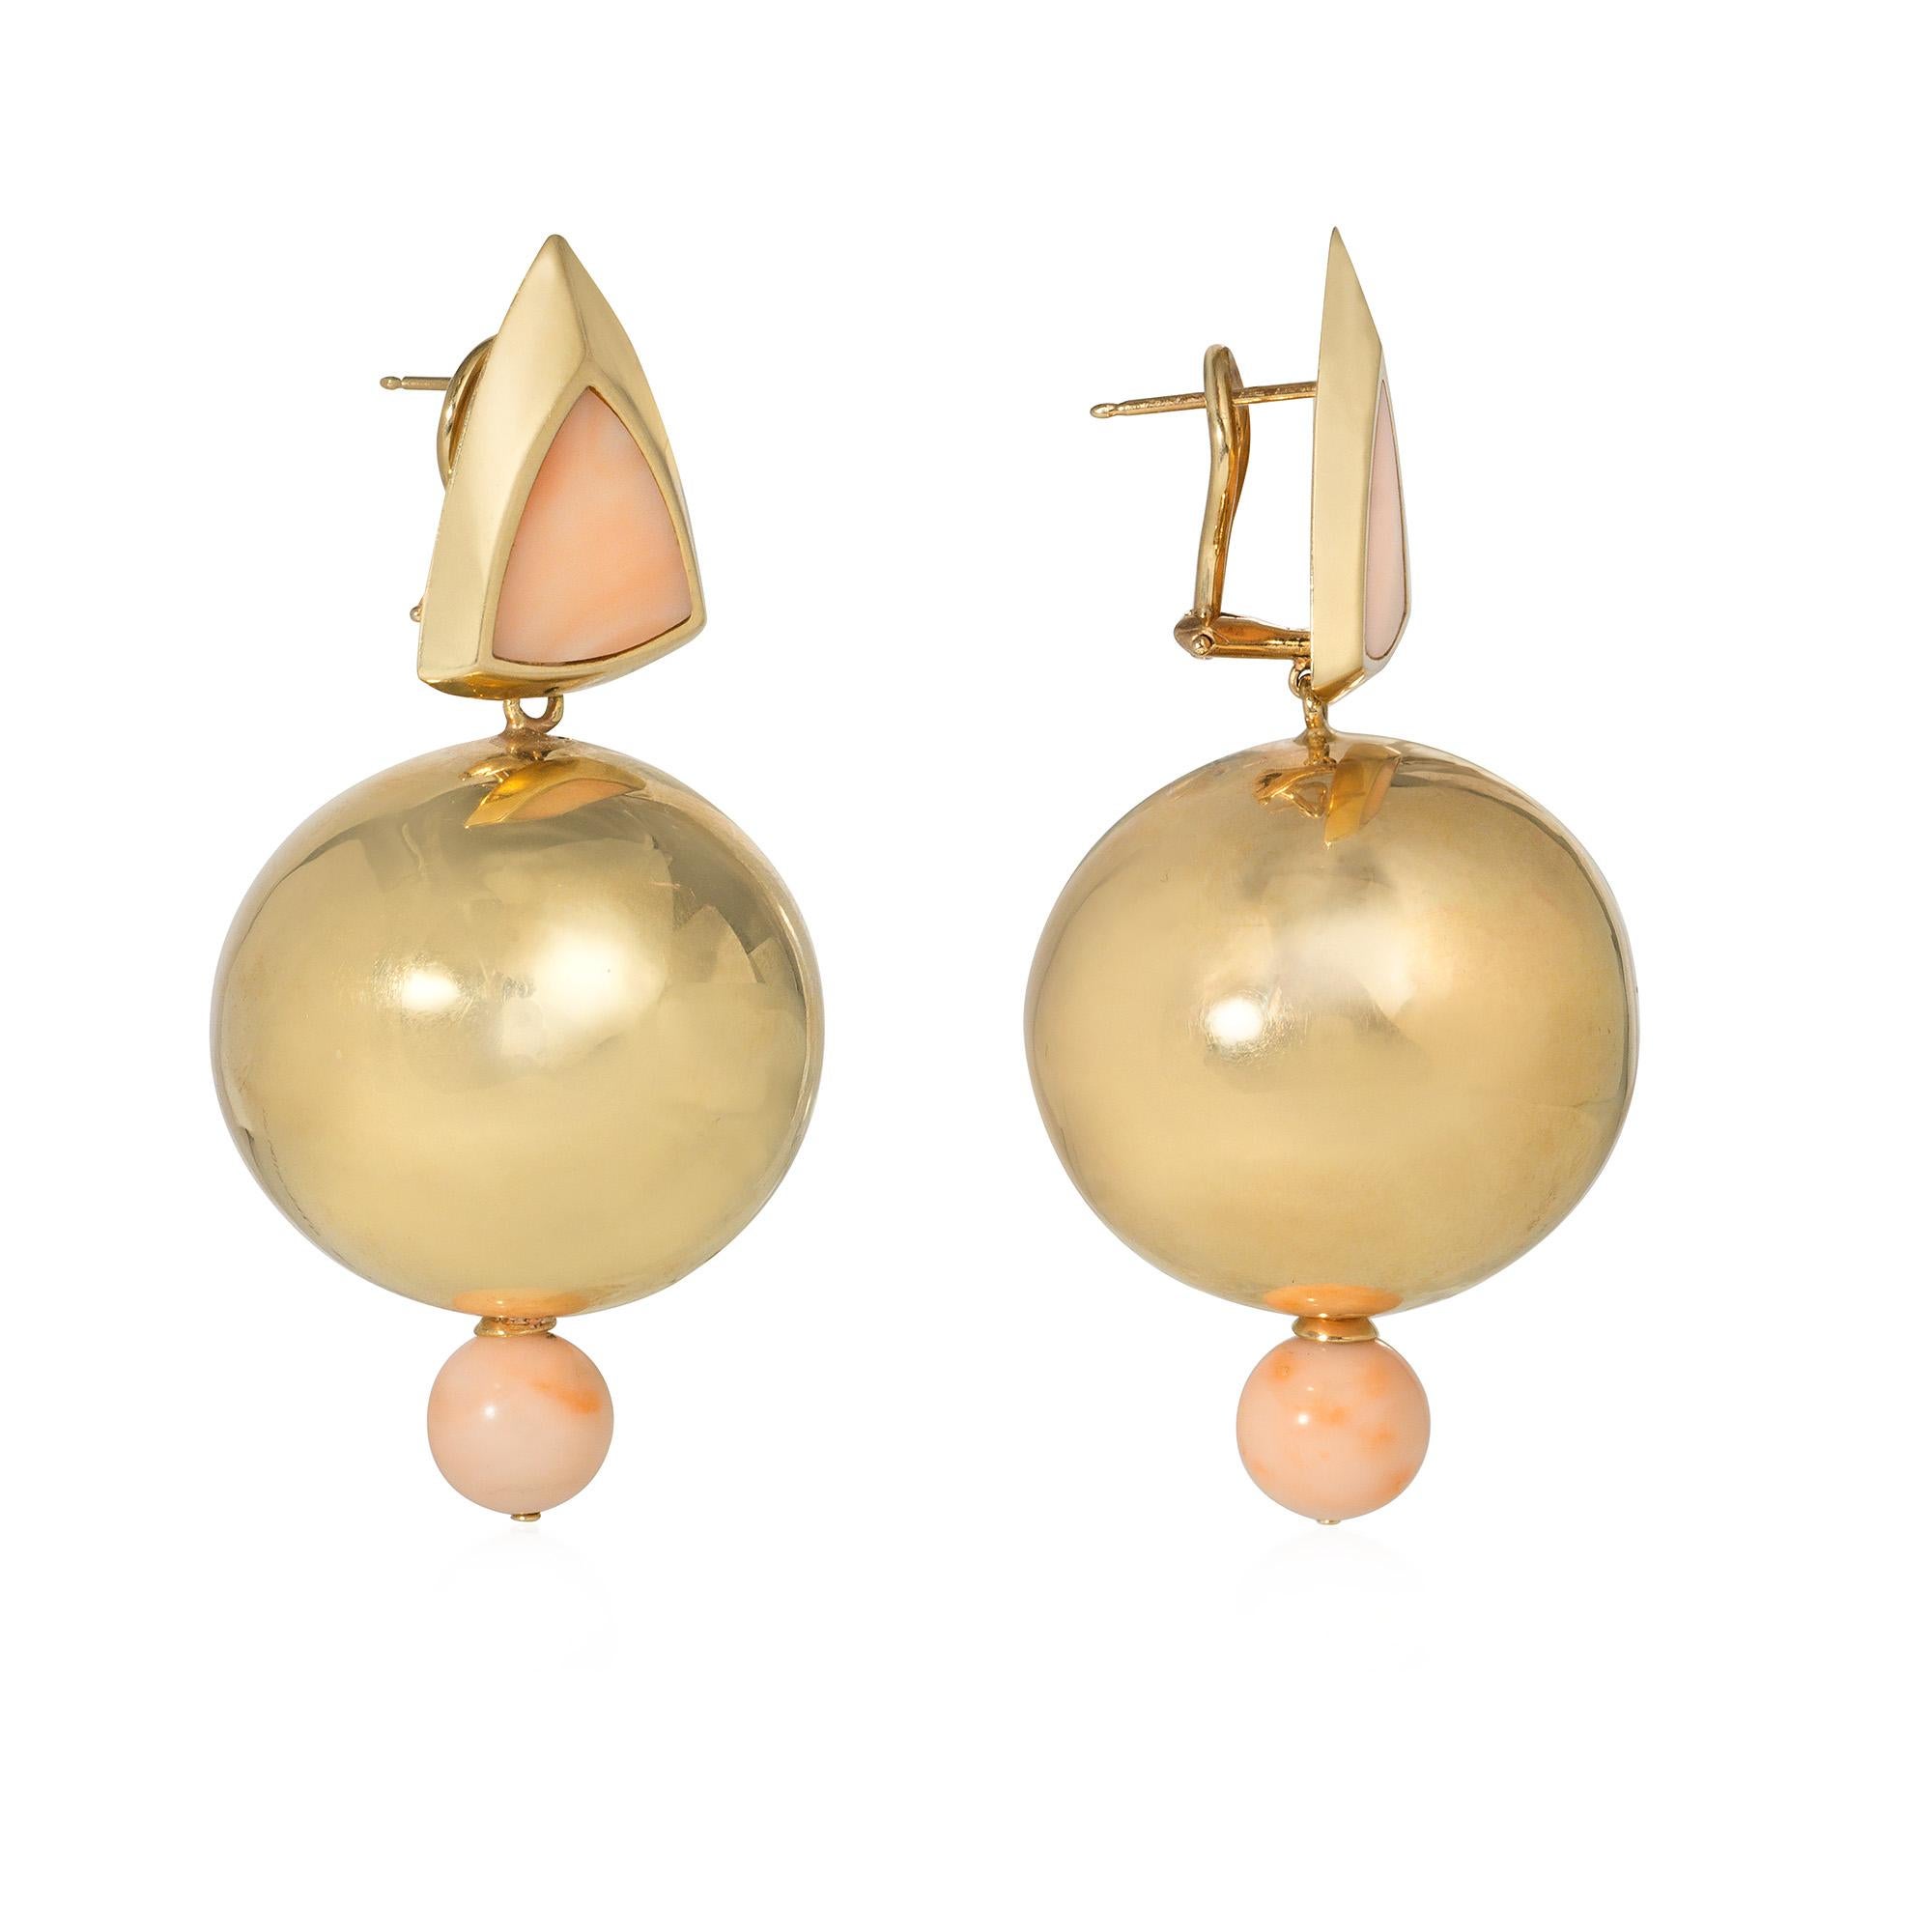 A pair of estate gold and coral Memphis style earrings of geometric motifs, comprising triangular gold surmounts inset with angel skin coral, suspending oversized gold bead pendants of 32mm each, with small angel skin coral bead terminals, in 14k